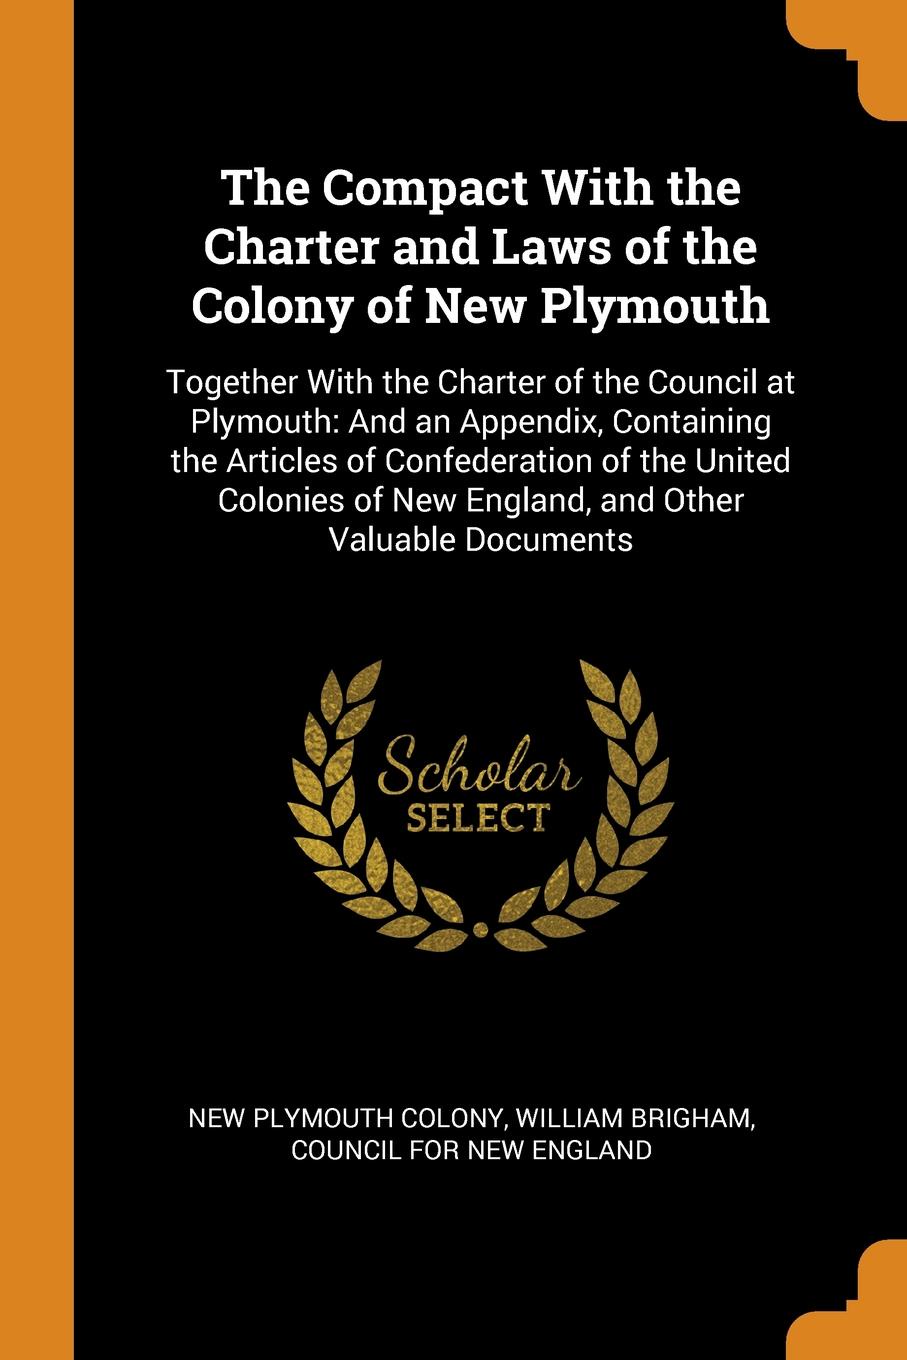 The Compact With the Charter and Laws of the Colony of New Plymouth. Together With the Charter of the Council at Plymouth: And an Appendix, Containing the Articles of Confederation of the United Colonies of New England, and Other Valuable Documents